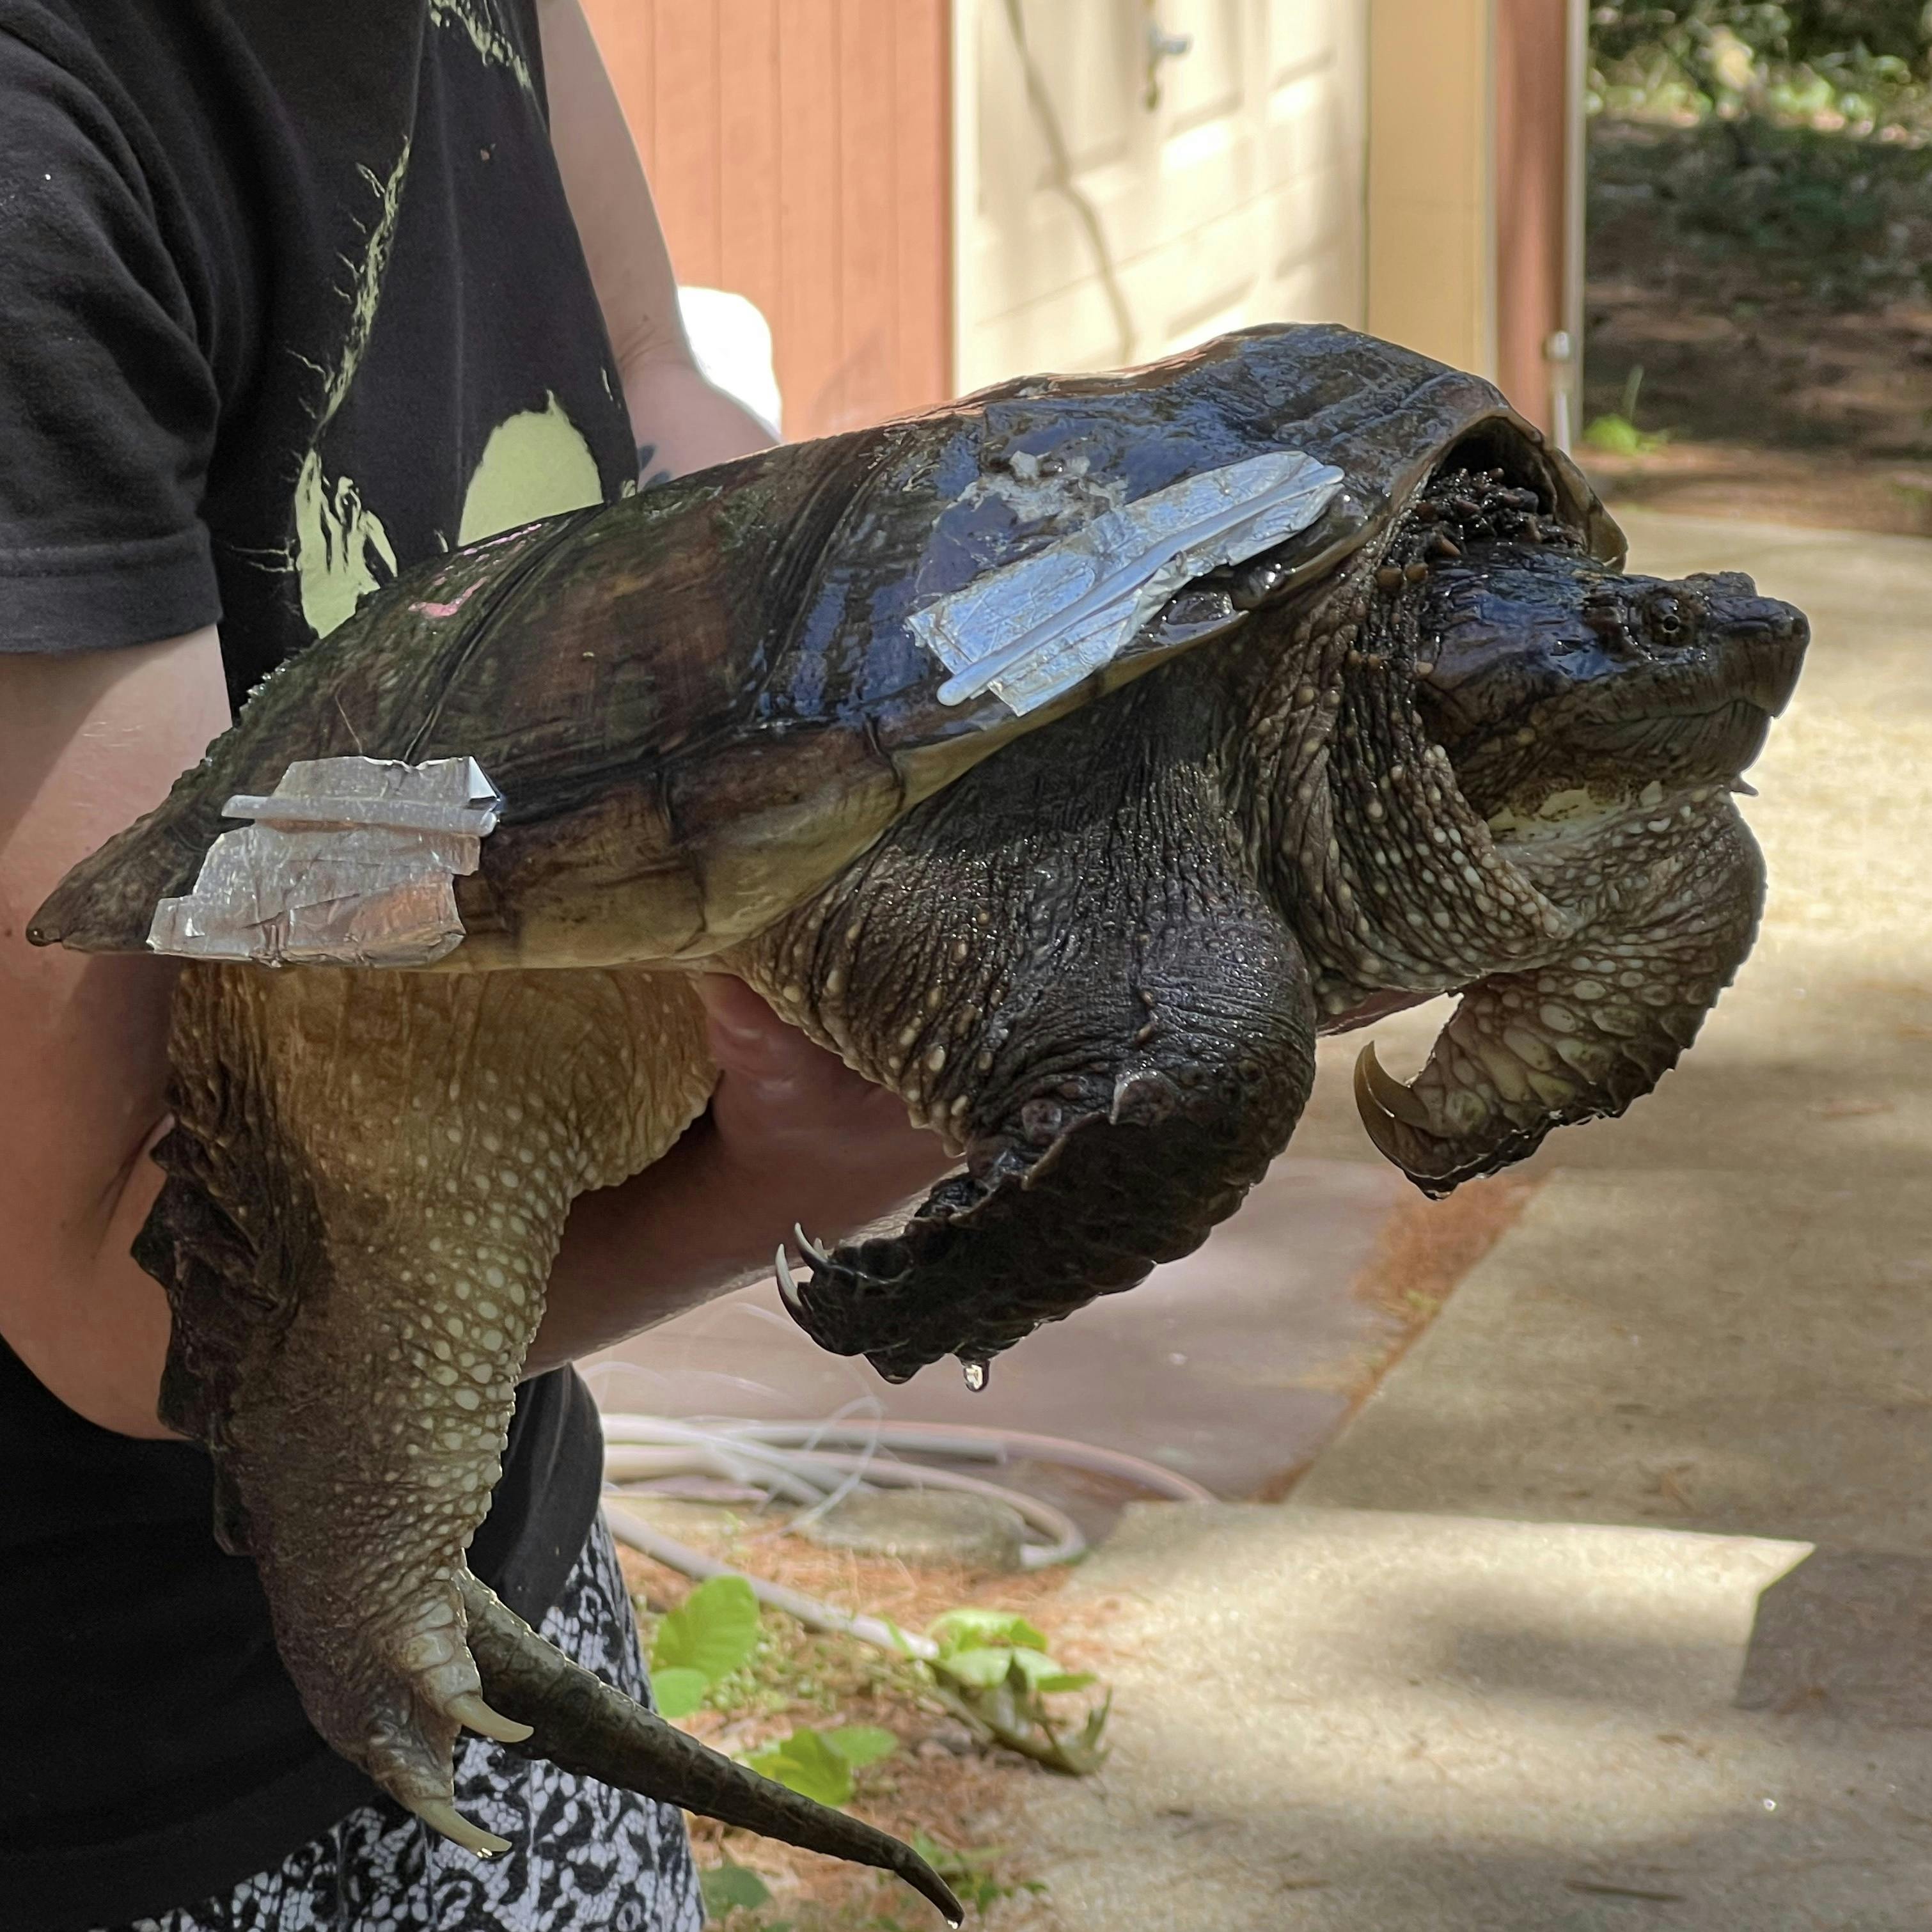 A snapping turtle being held